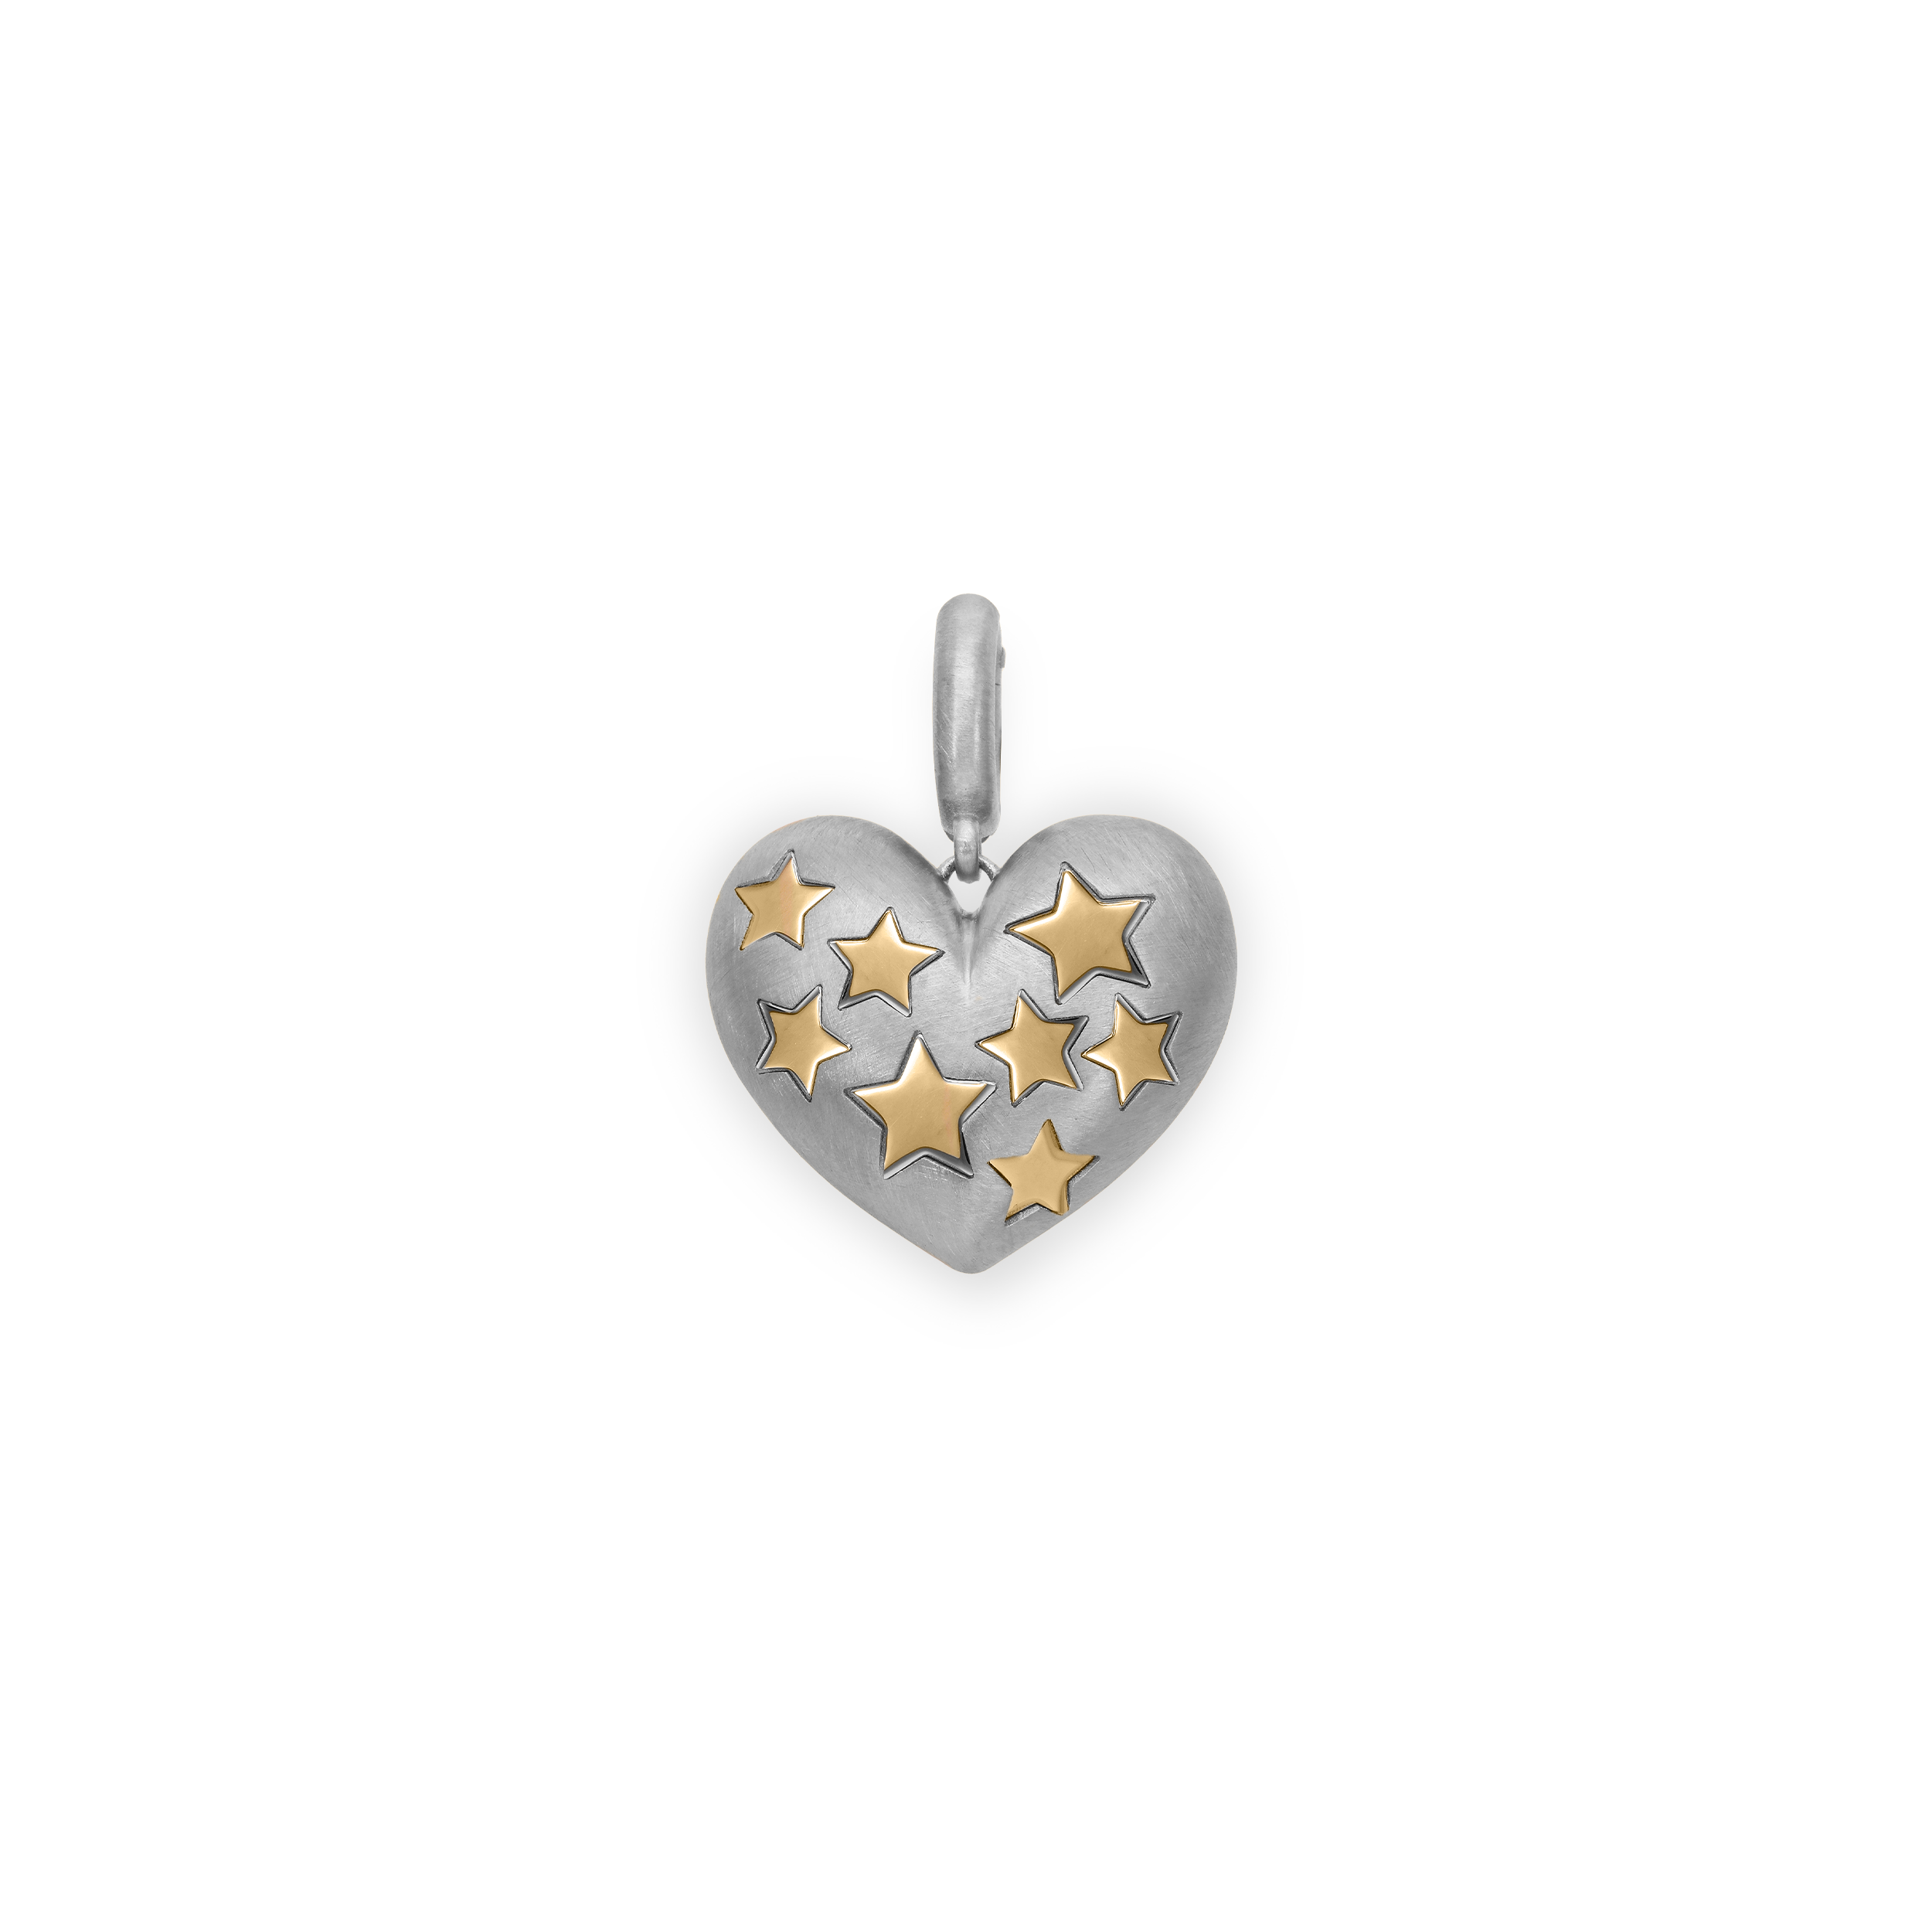 Paulette Brushed White Gold Baby Heart with Yellow Gold Stars Pendant